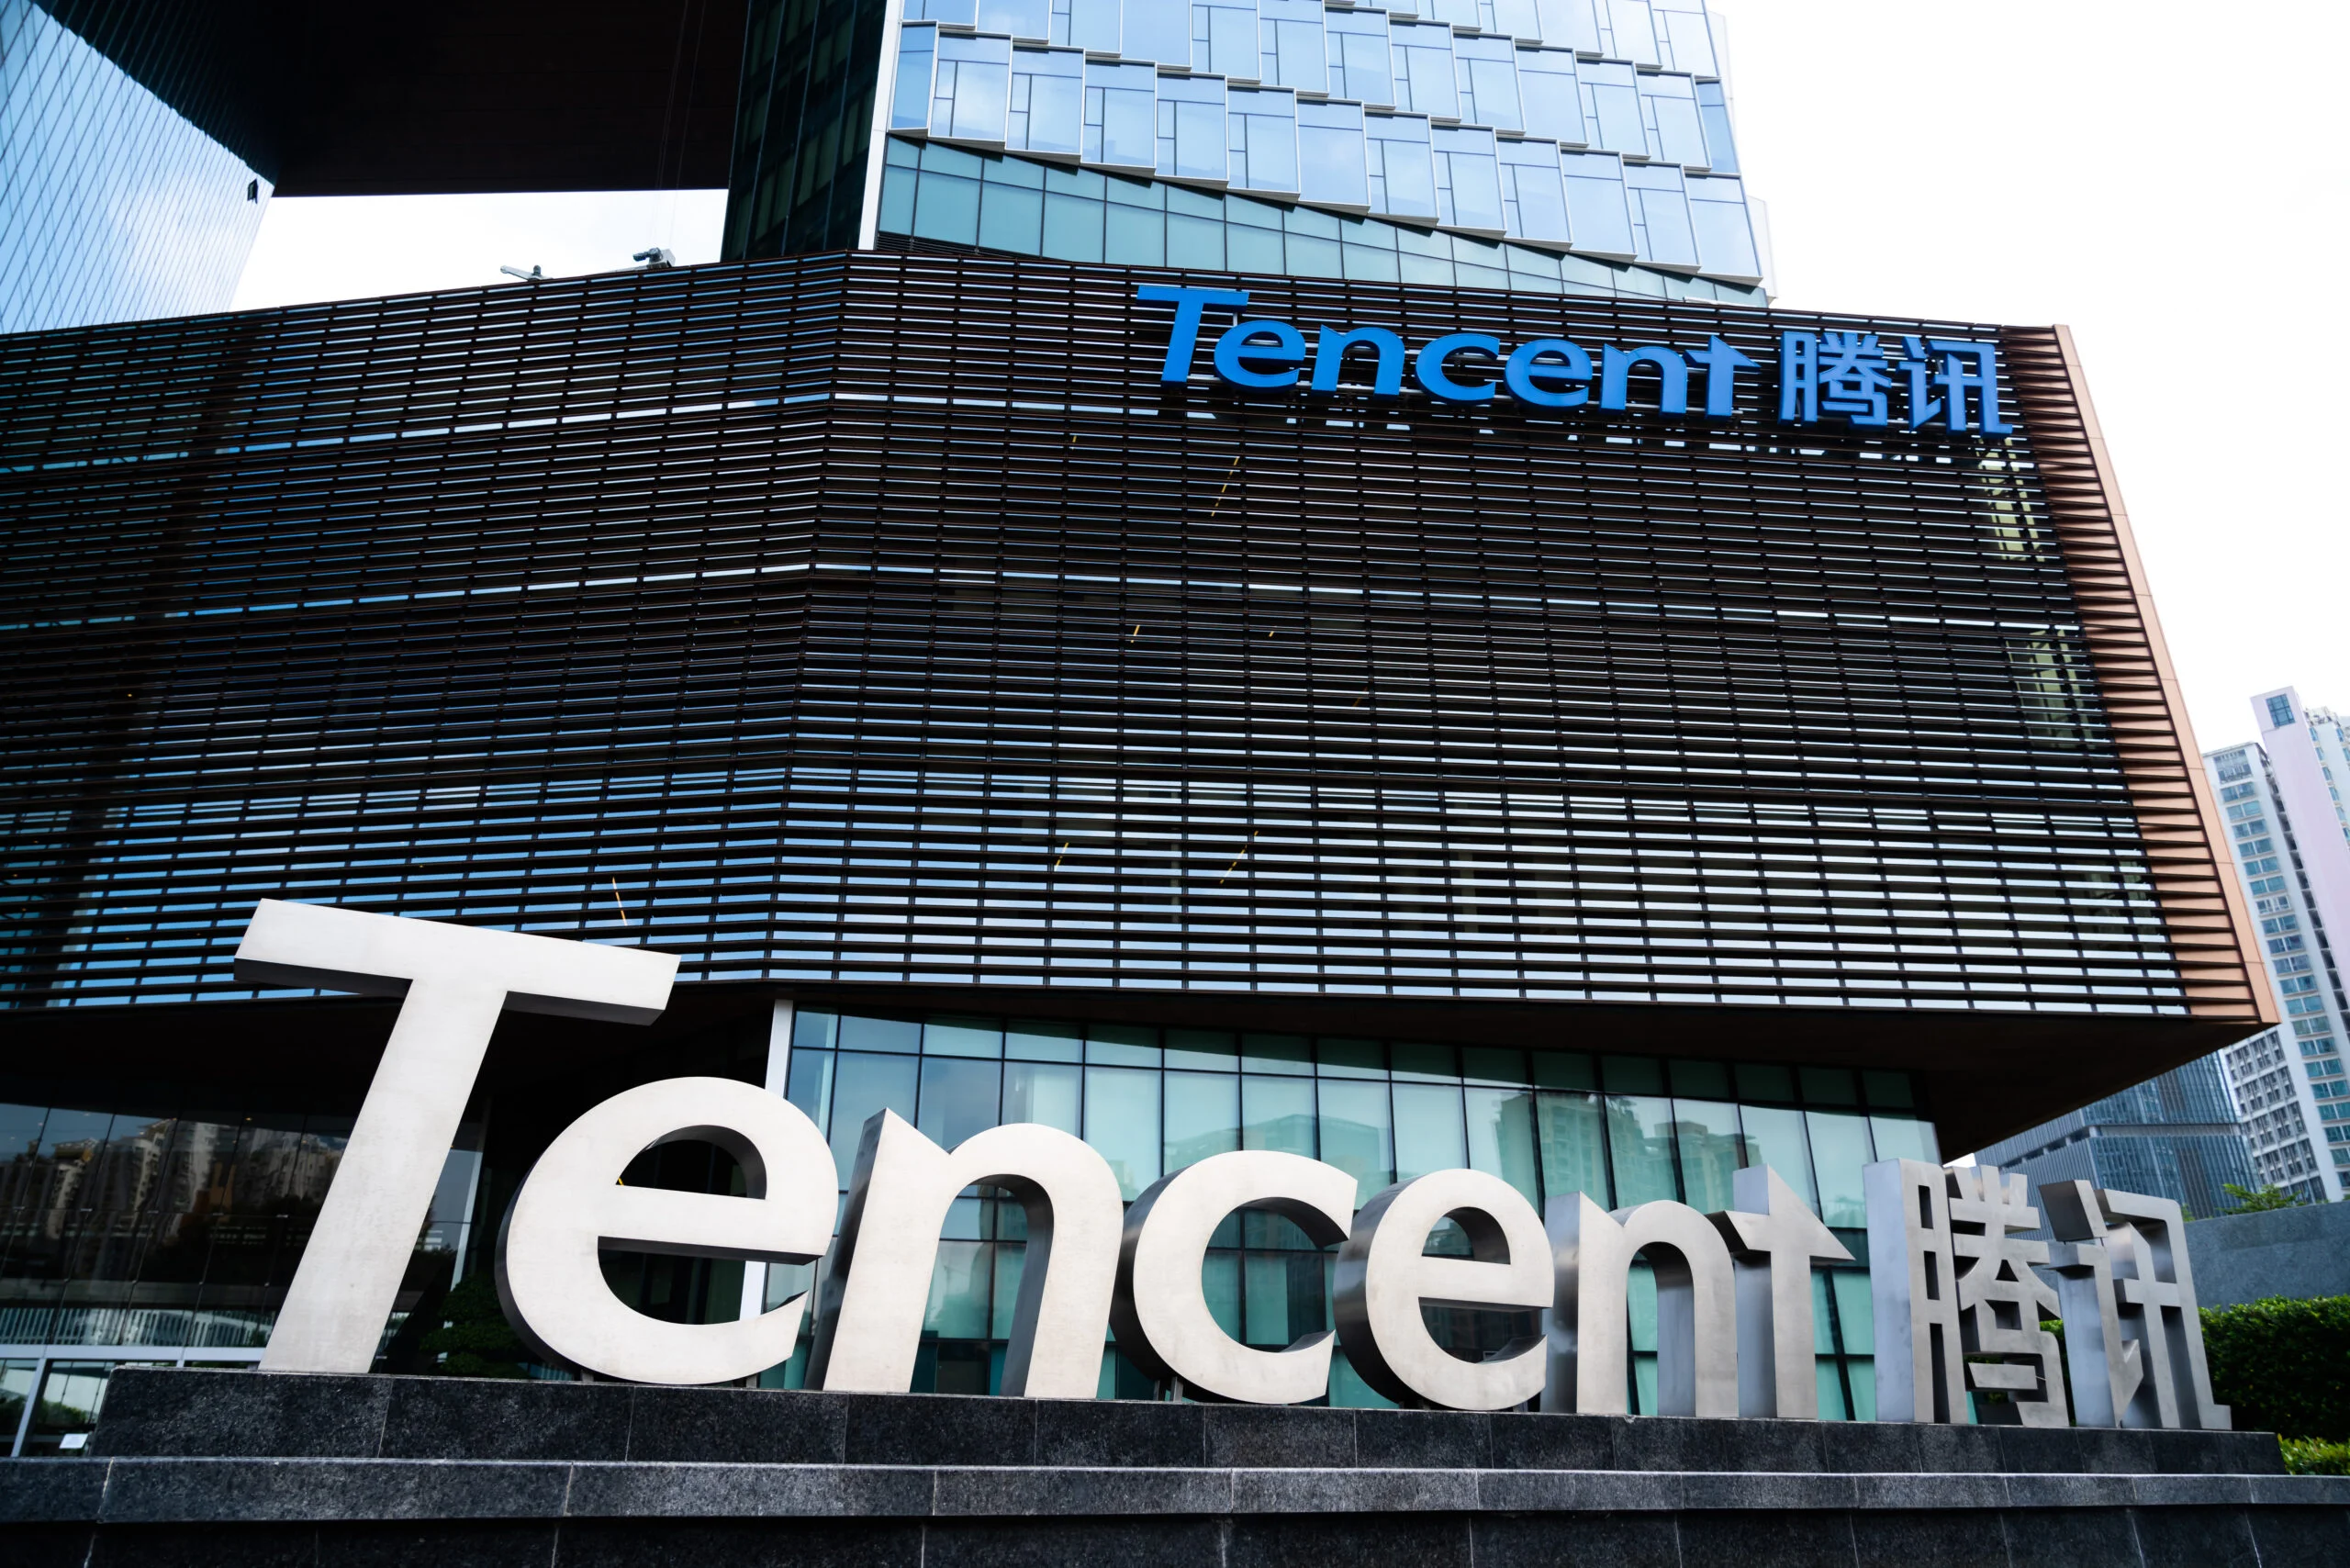 Who are Tencent's joint venture partners?